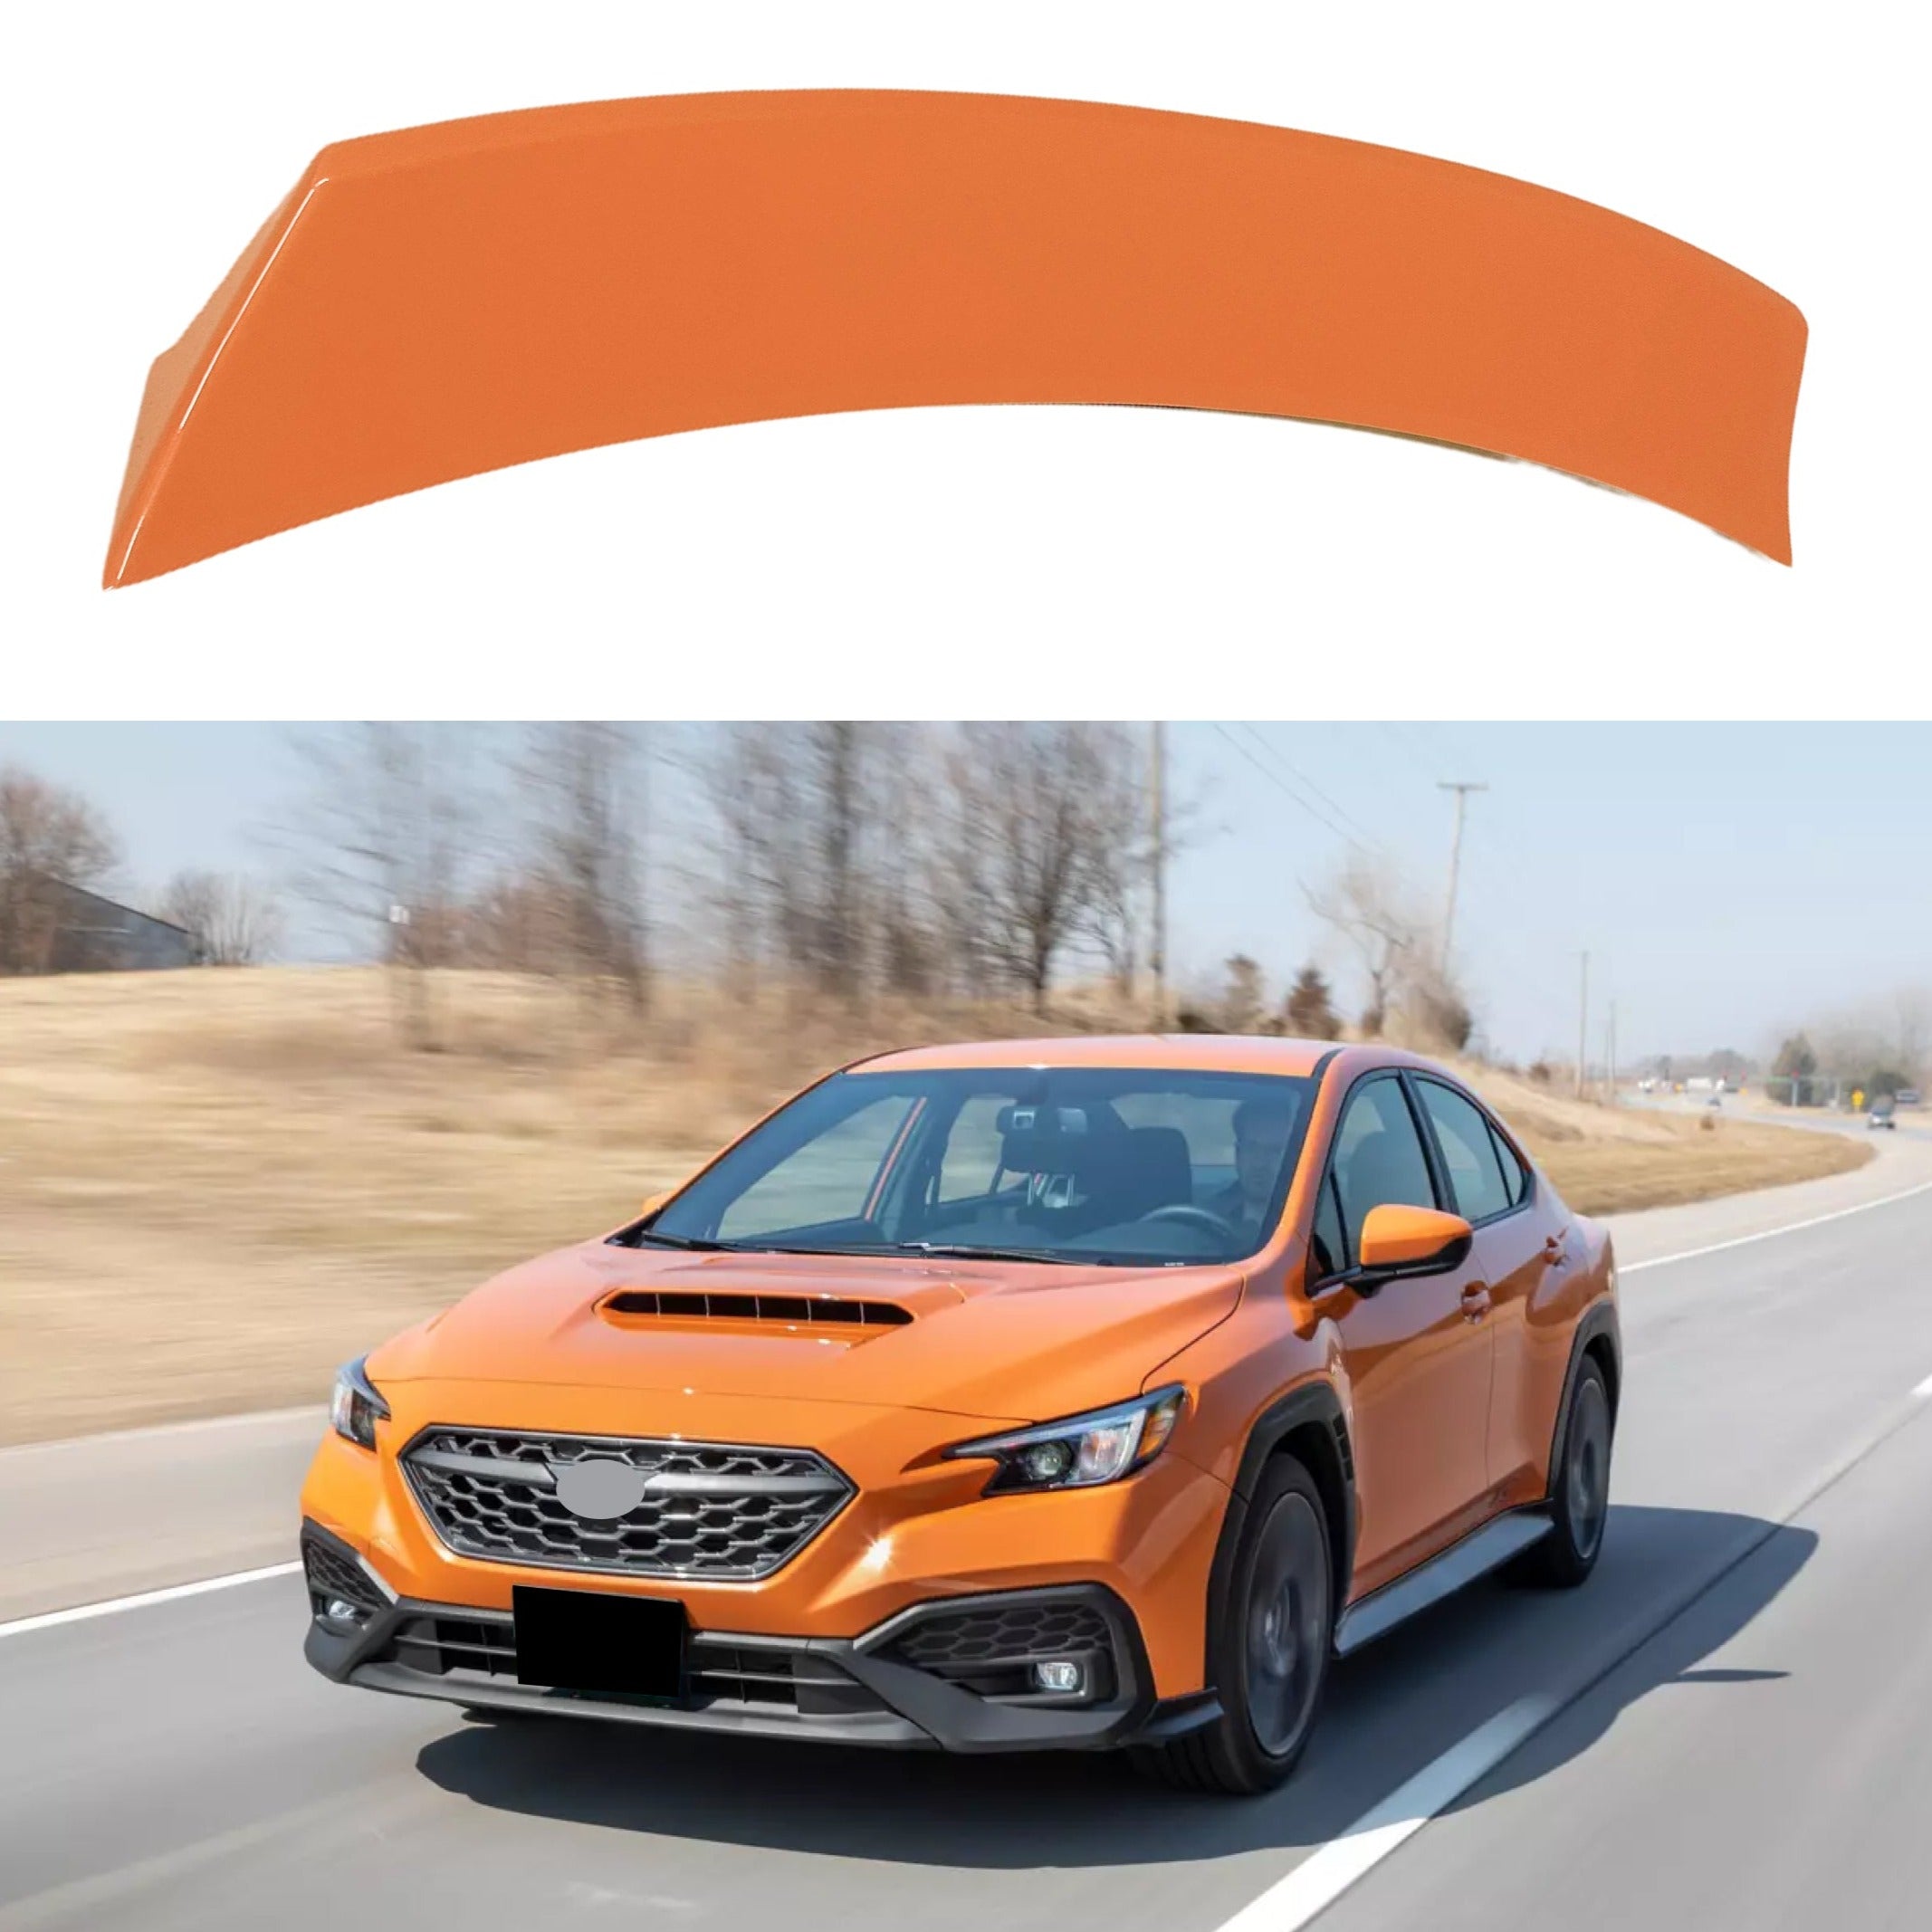 Paint Matched Solar Orange Pearl Rear Duckbill Spoiler Wing on WRX STI 2022 2023 2024, enhancing aerodynamics and style.